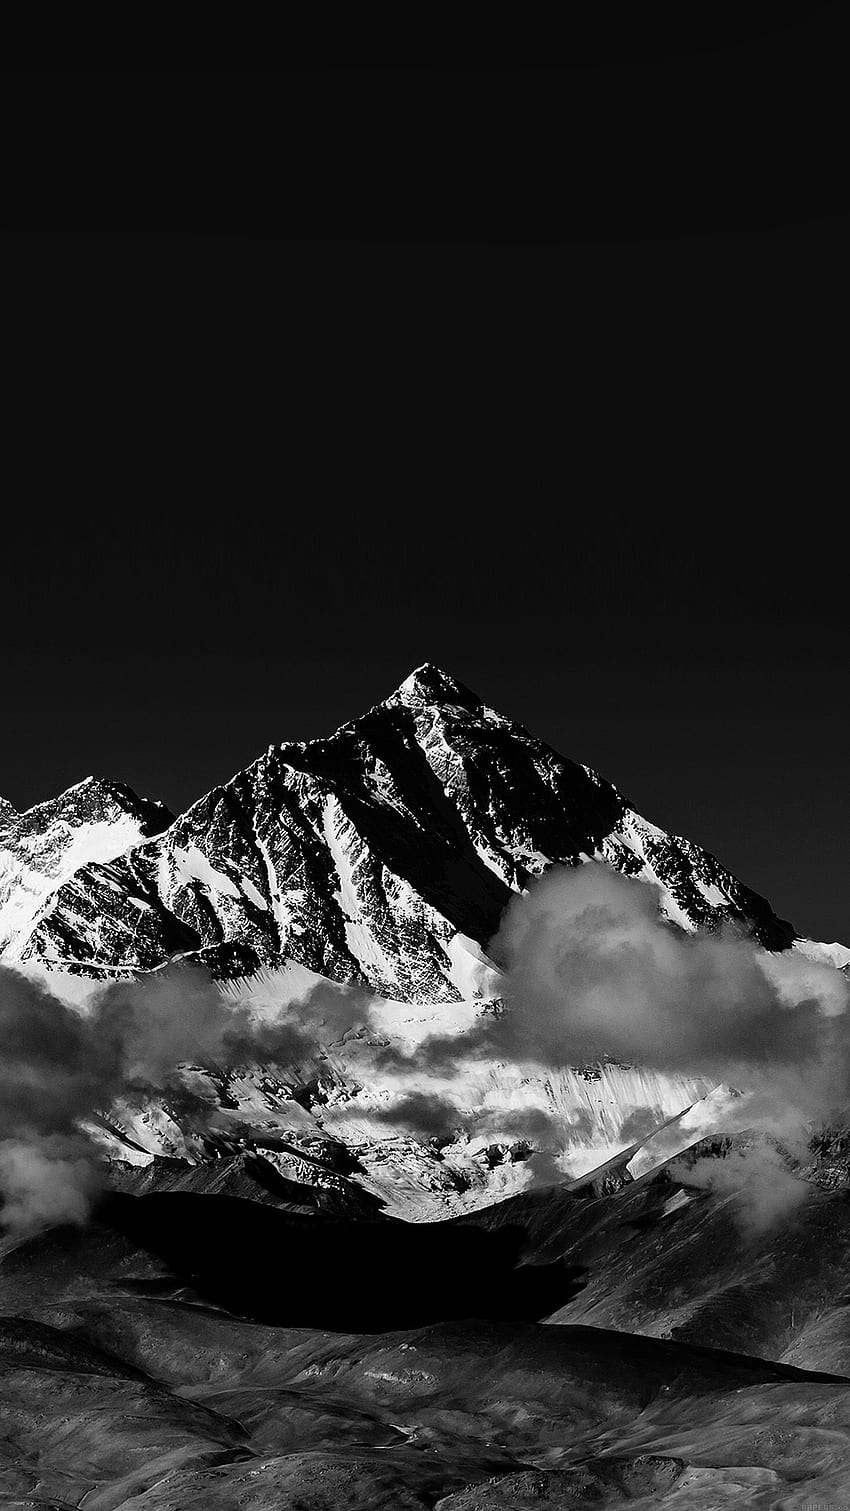 62600 Black And White Mountains Stock Photos Pictures  RoyaltyFree  Images  iStock  Black and white nature Mountain range Mountain landscape